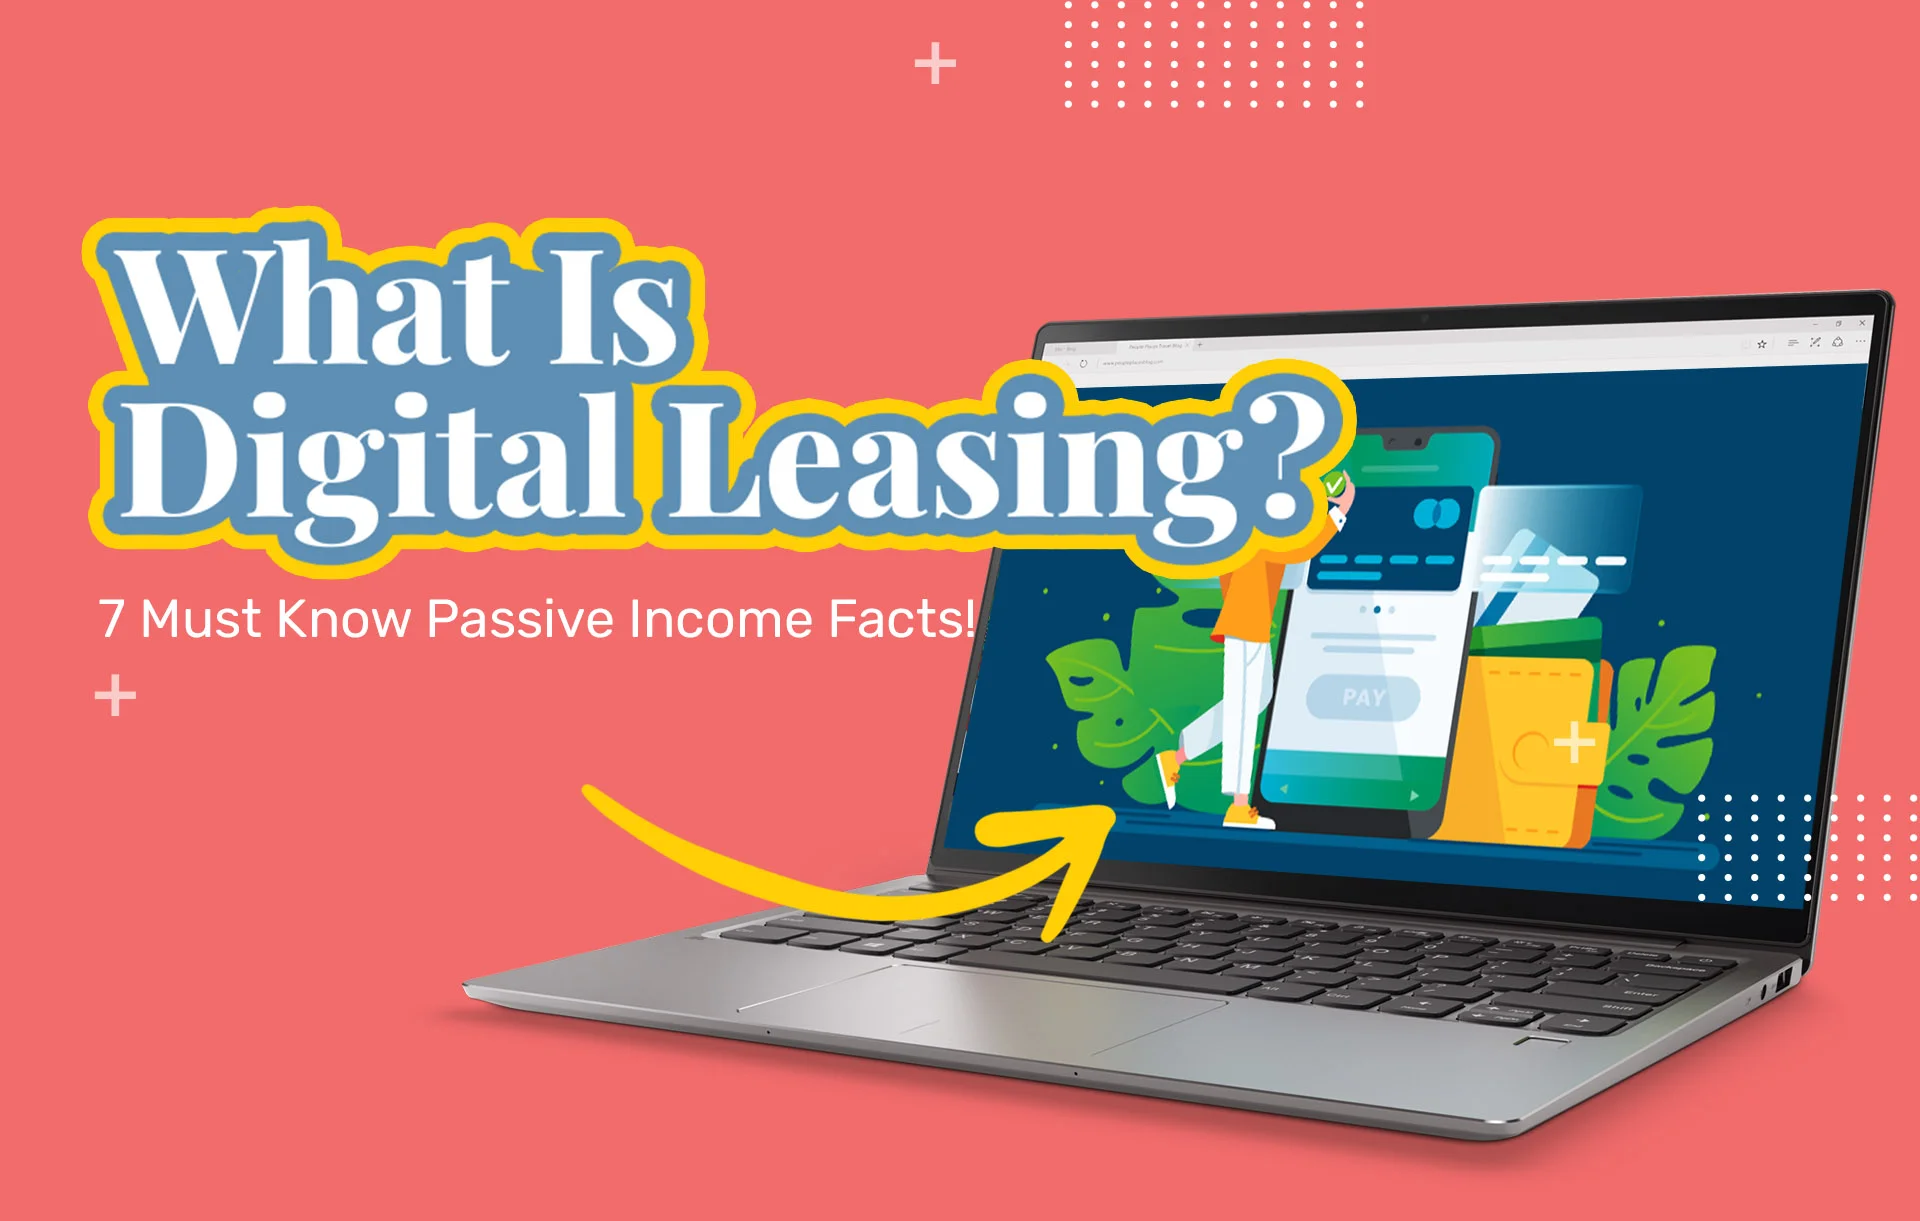 Is Digital Real Estate Legit? 7 Must Know Passive Income Facts!